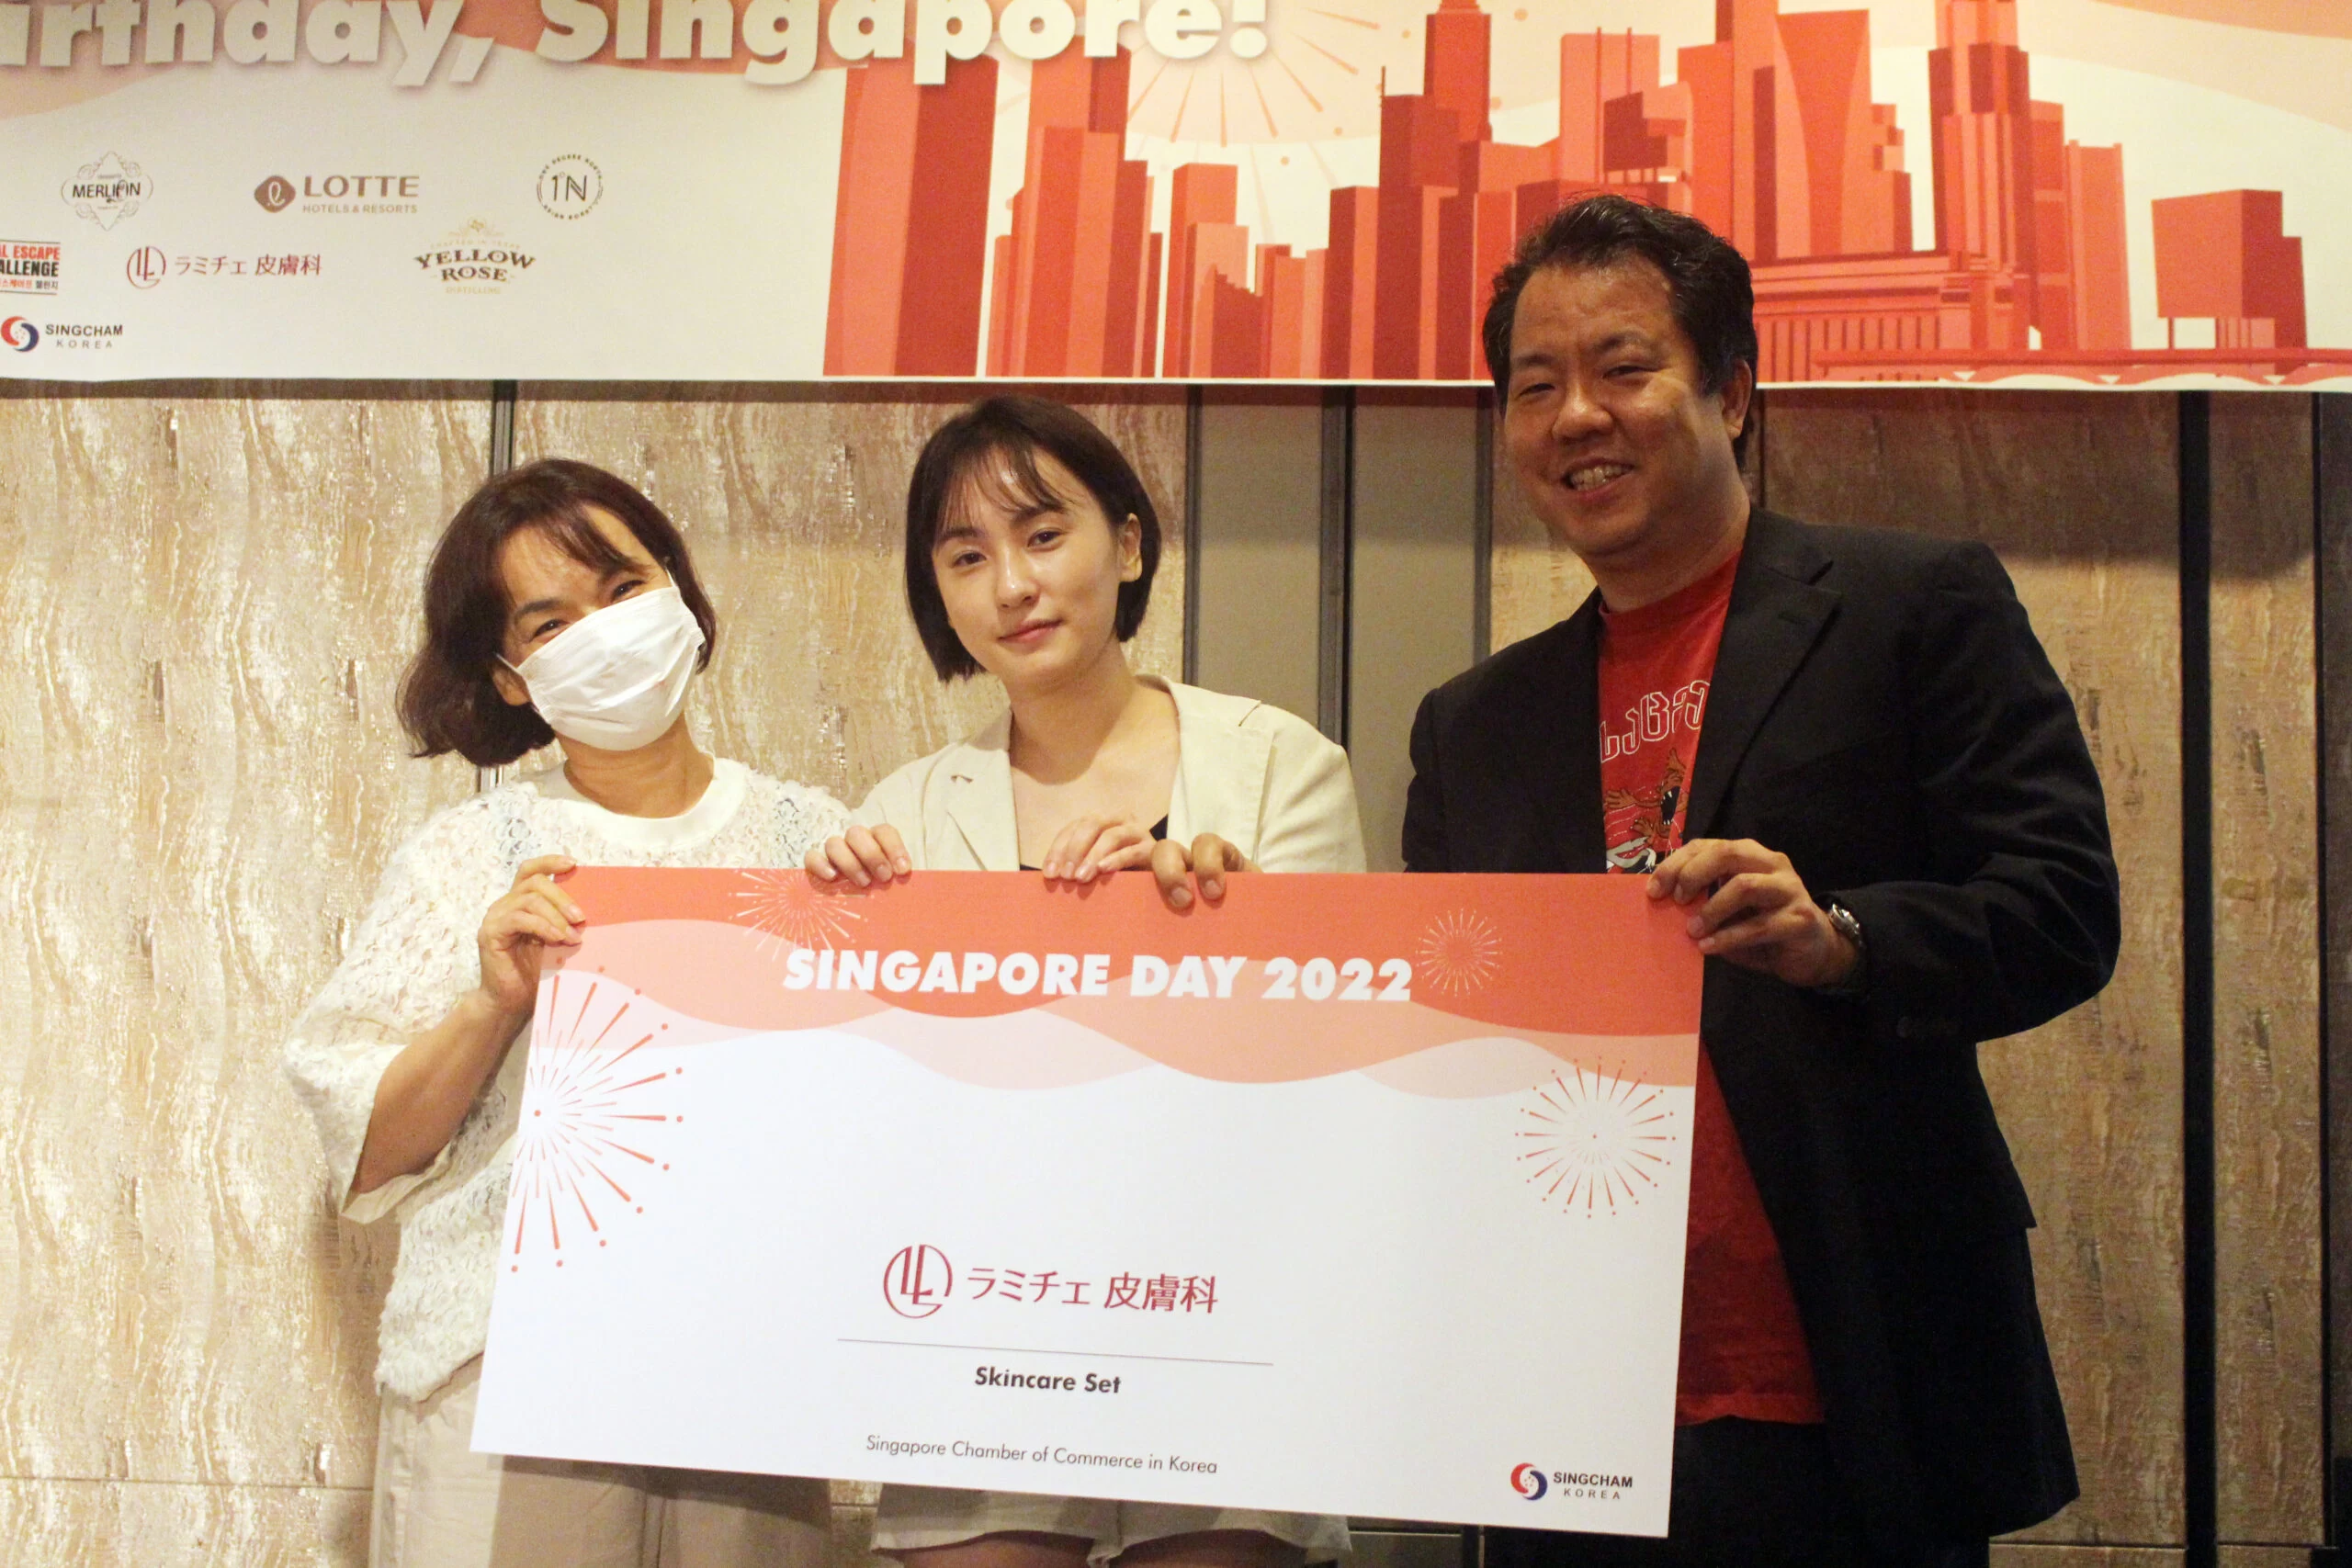 Prize Winners at Happy Singapore Day